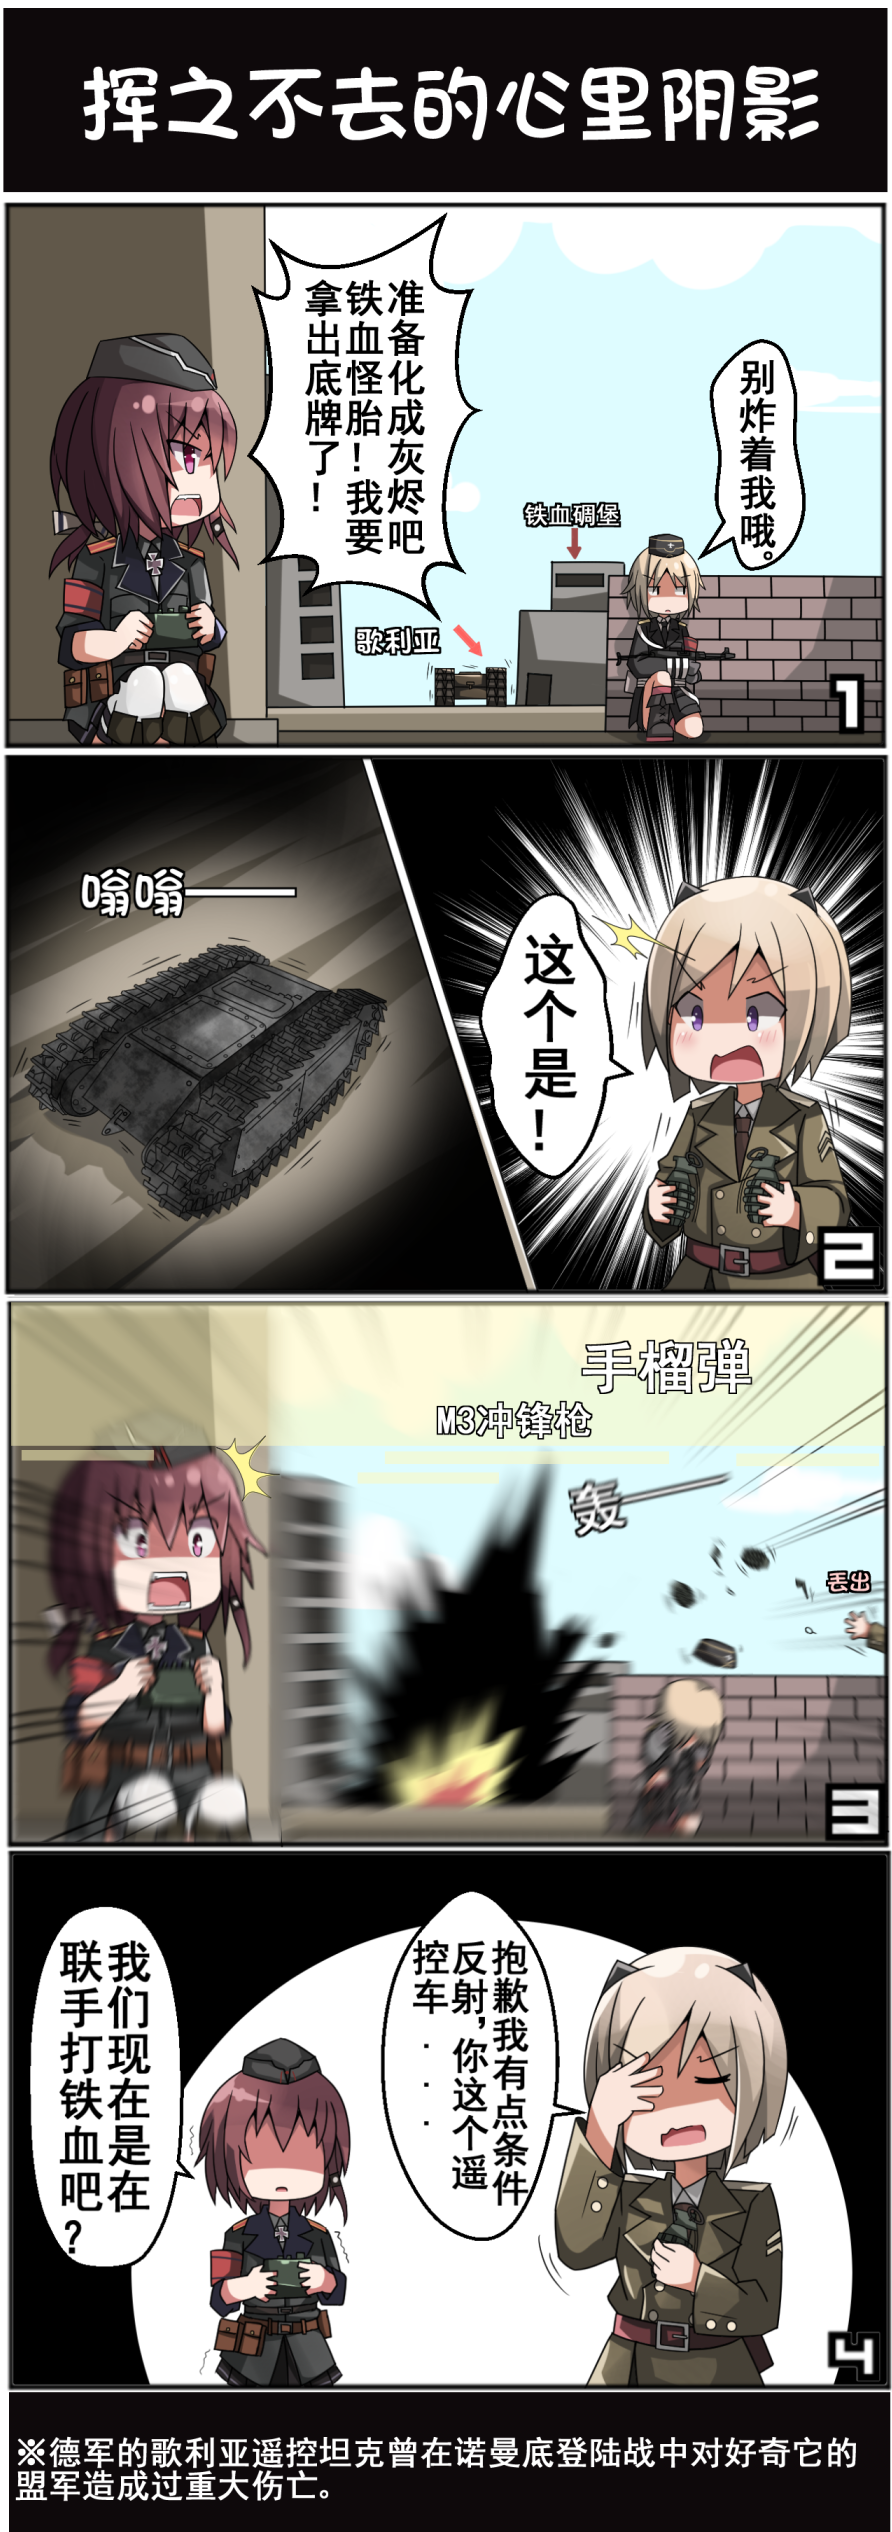 3girls 4koma absurdres ac130 blonde_hair brown_hair chinese comic commentary commentary_request explosion explosive german_clothes girls_frontline goliath_tracked_mine grenade gun hat highres iron_cross m3_grease_gun_(girls_frontline) military military_uniform mine_(weapon) mp38 mp38_(girls_frontline) multiple_girls p38 p38_(girls_frontline) short_hair submachine_gun translation_request uniform violet_eyes weapon